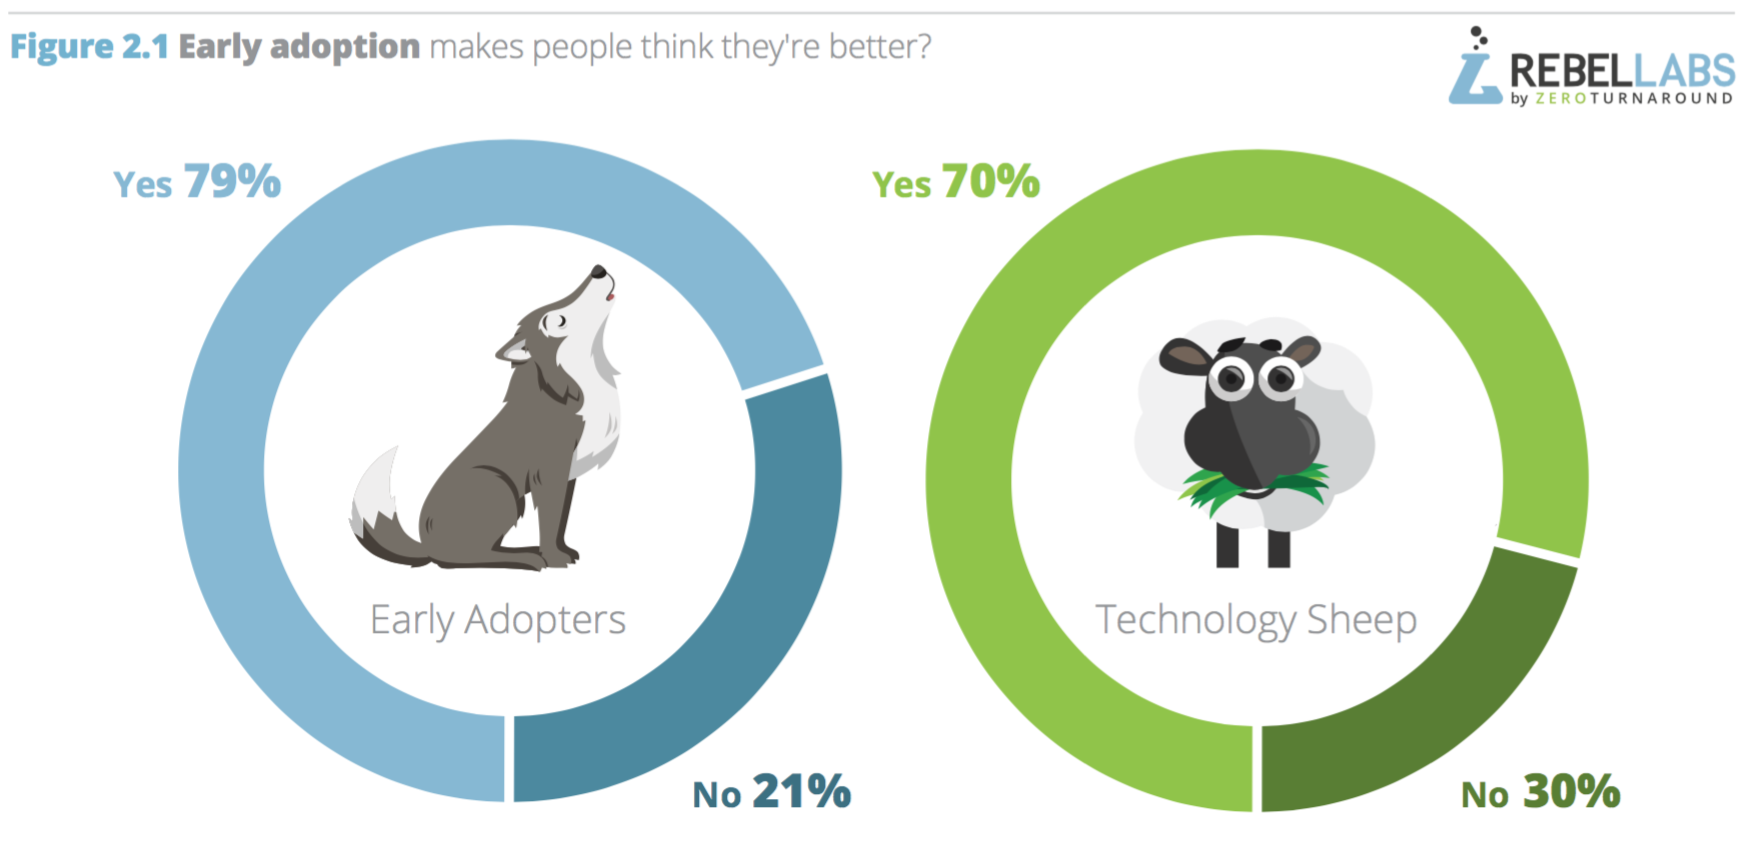 image showing what percentage of early adoptors and sheep think they are better than average in their role